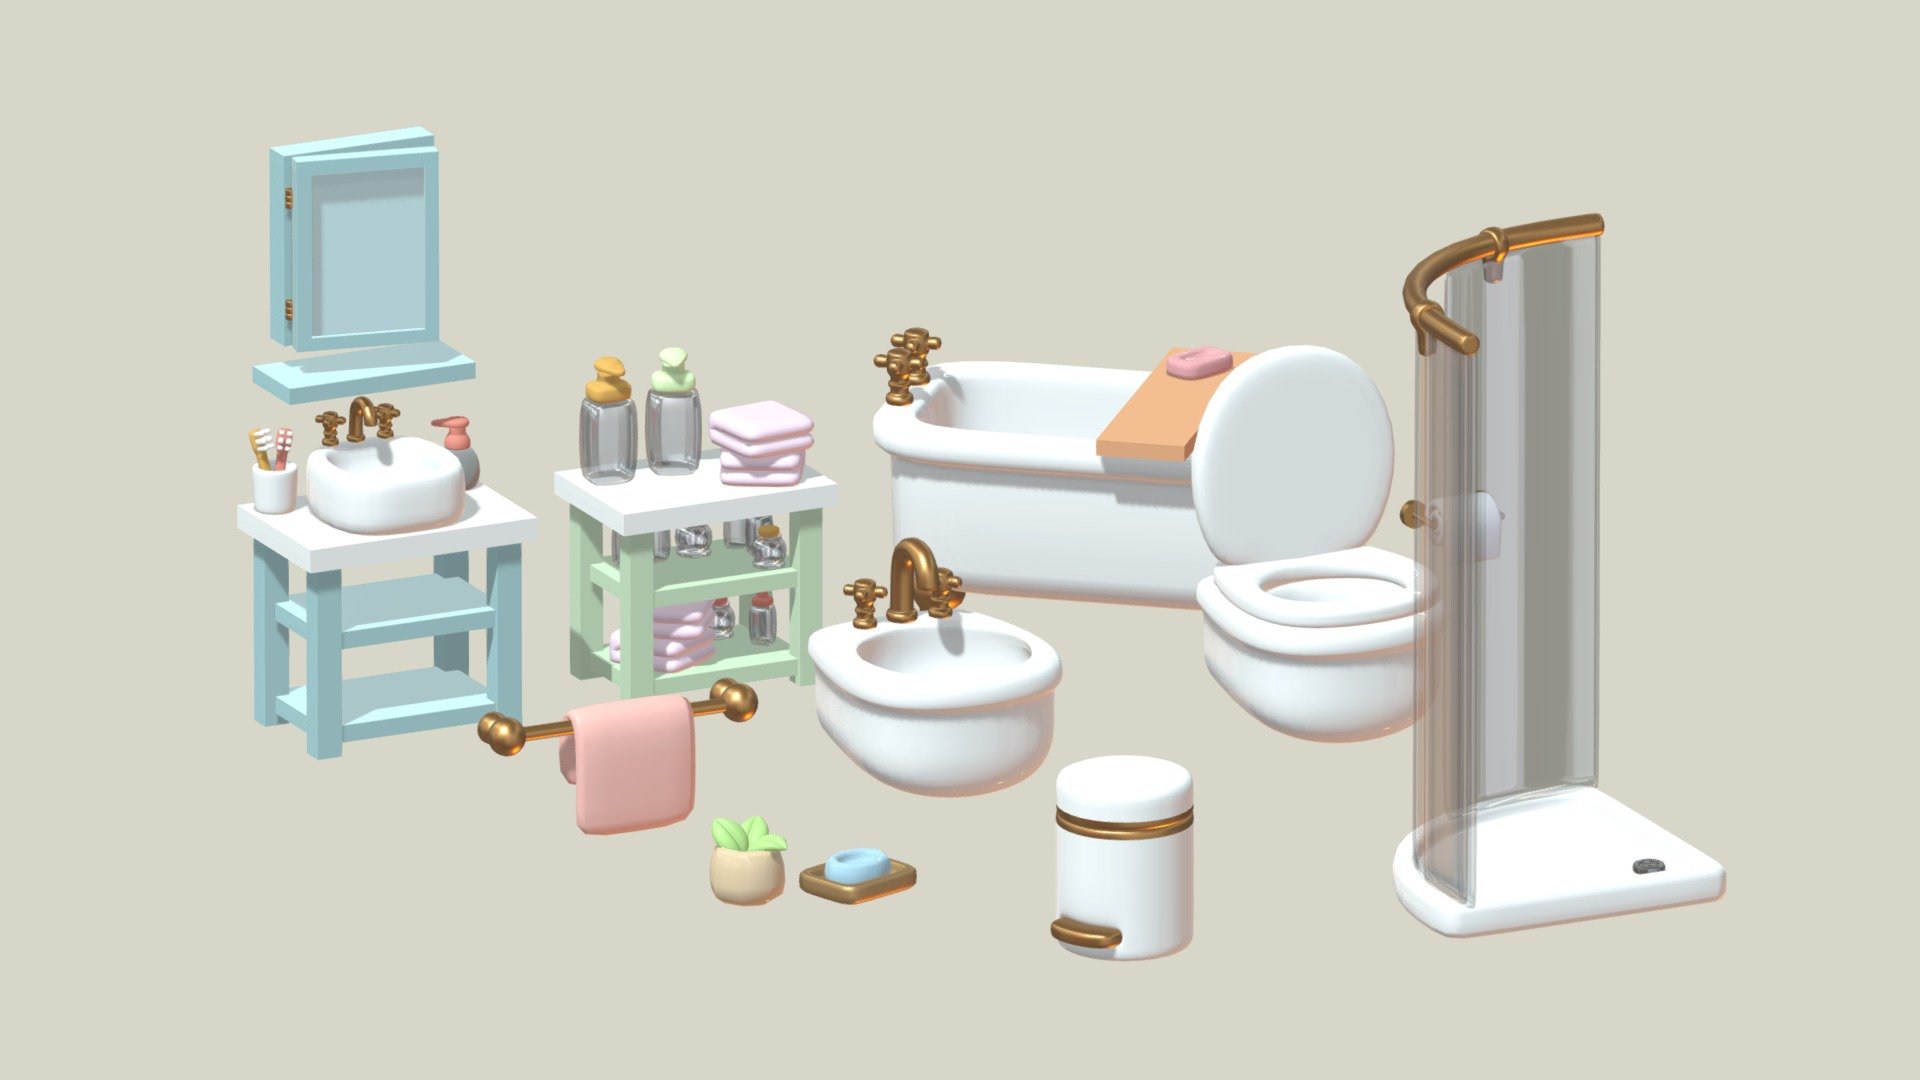 Bathroom objects pack: contains a bathtub, a shower, bathroom accessories, a toilet, a bidet, a sink, etc&hellip;

Hope you like it! - Bathroom Pack - 3D model by Nicky Blender (@nickyblender) 3d model